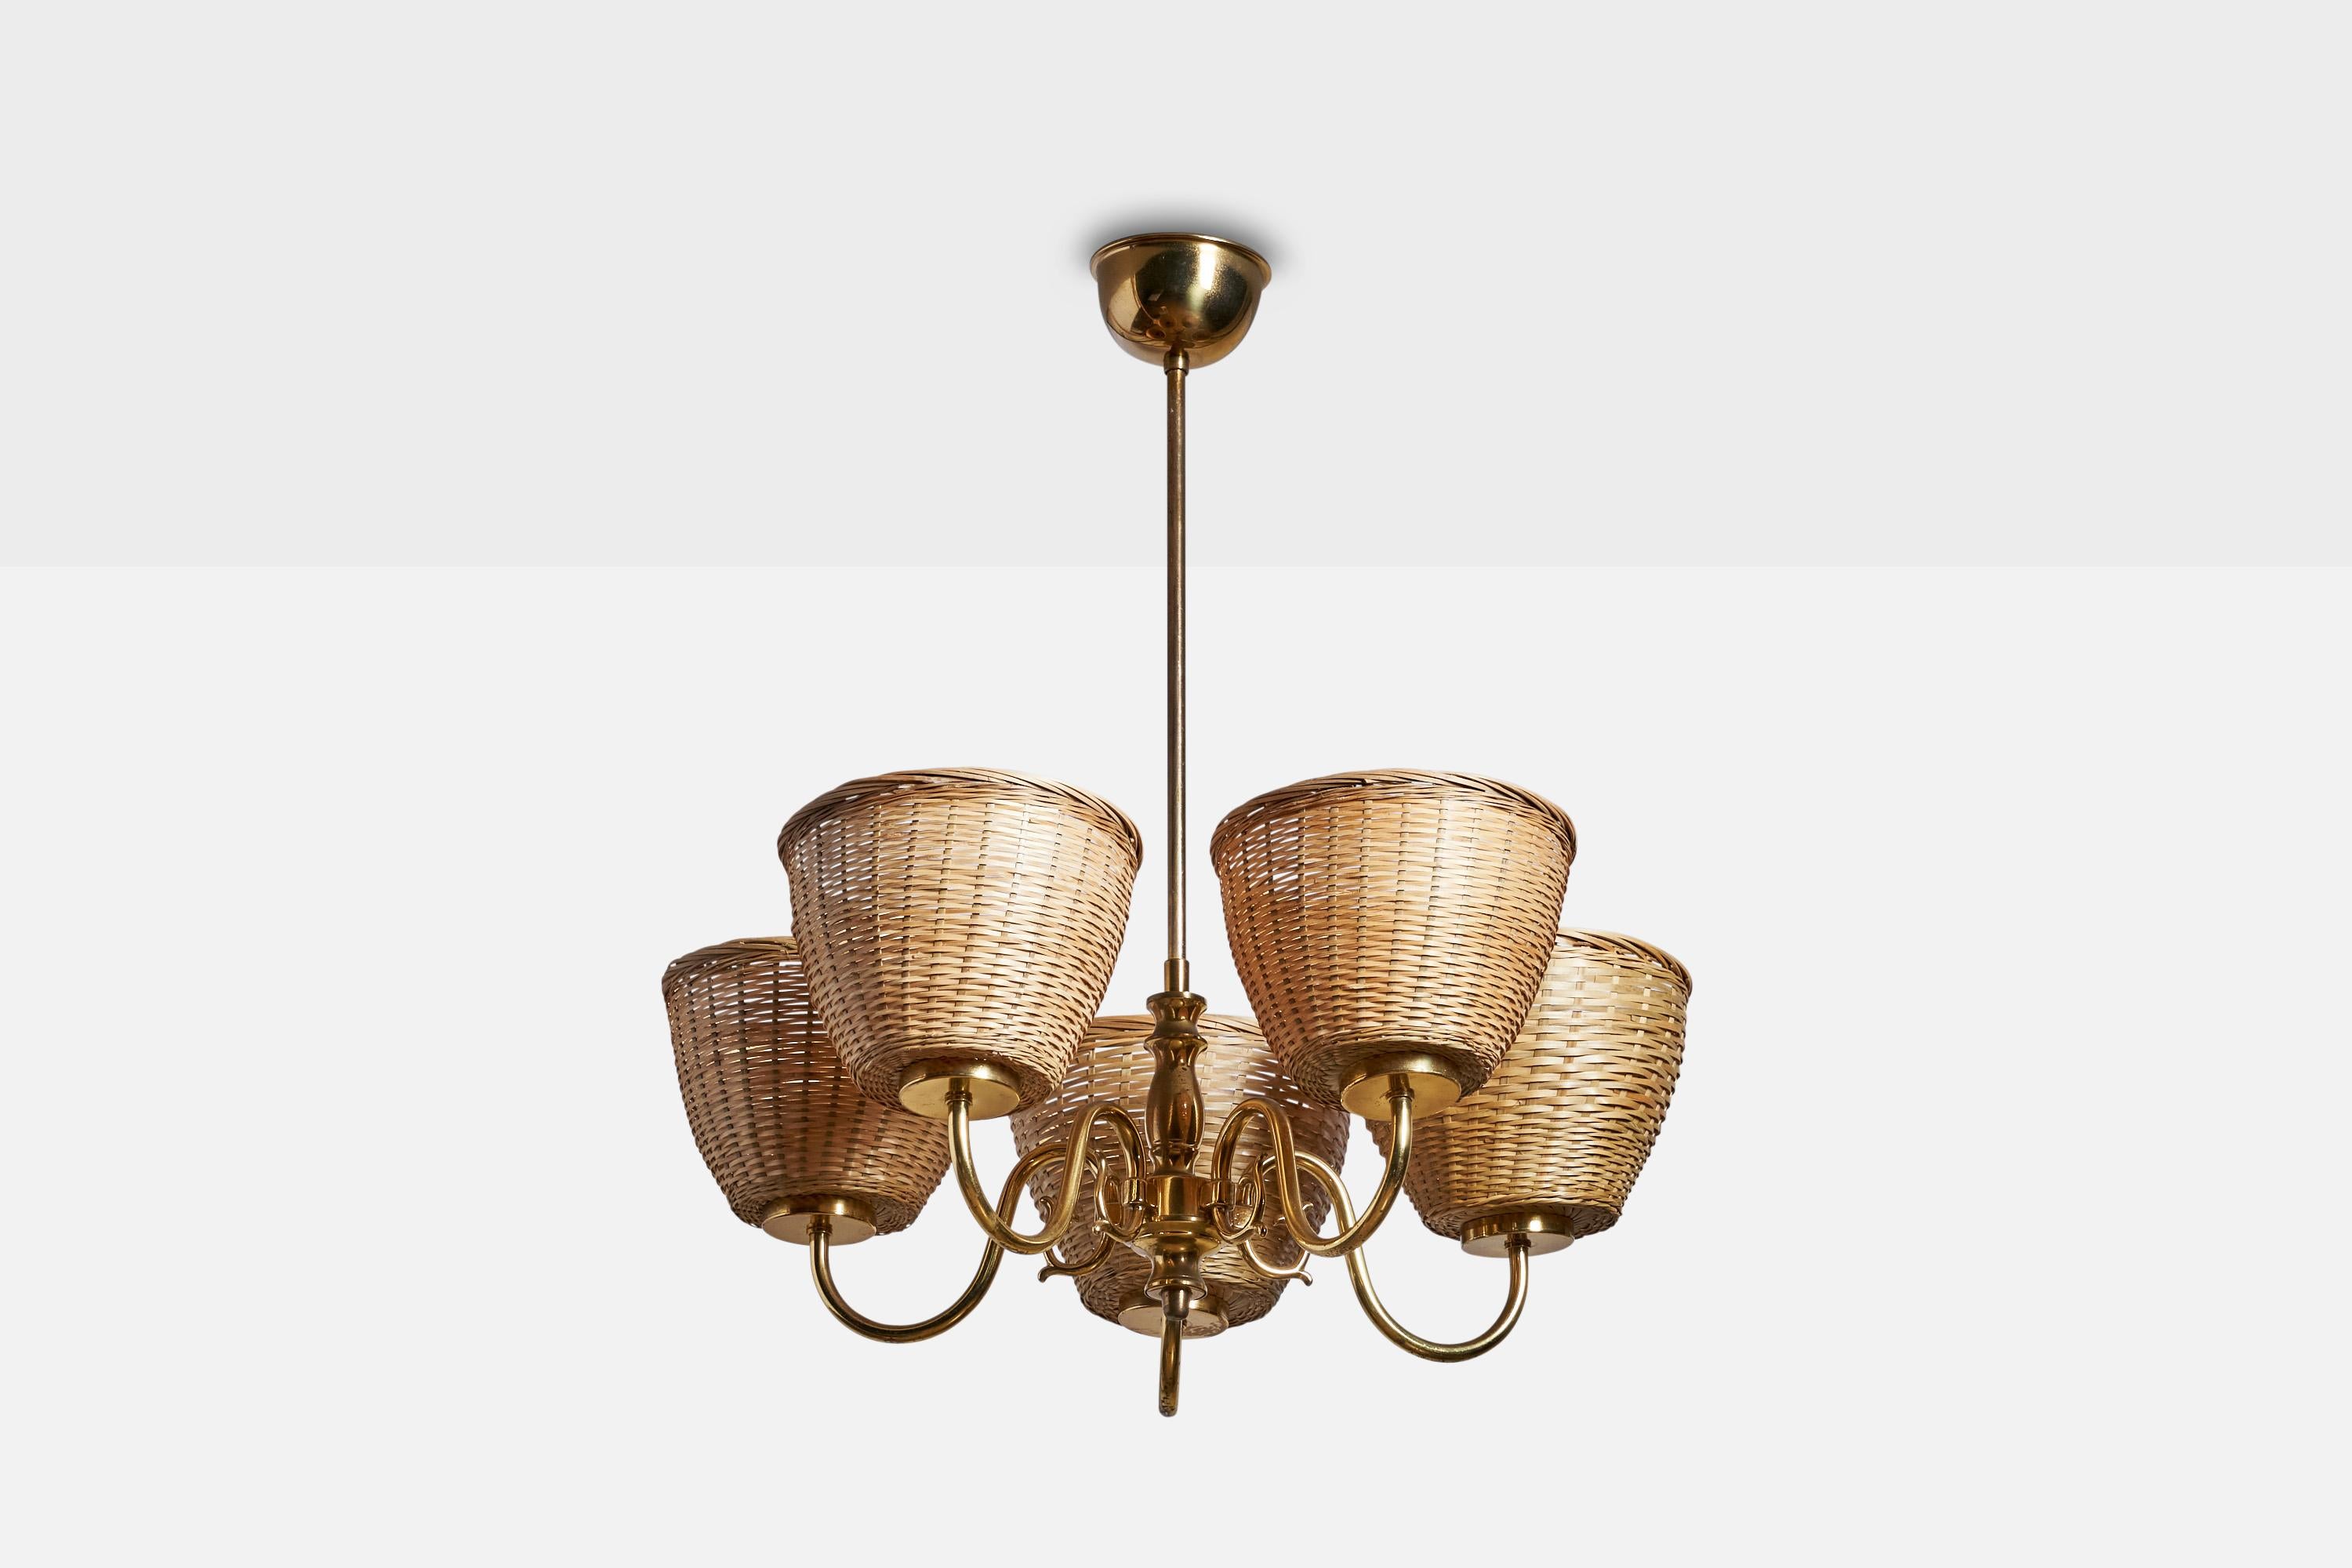 A brass and rattan chandelier designed and produced in Sweden, 1940s.

Dimensions of canopy (inches): 2” H x 3.5” Diameter
Socket takes standard E-26 bulbs. 5 sockets.There is no maximum wattage stated on the fixture. All lighting will be converted